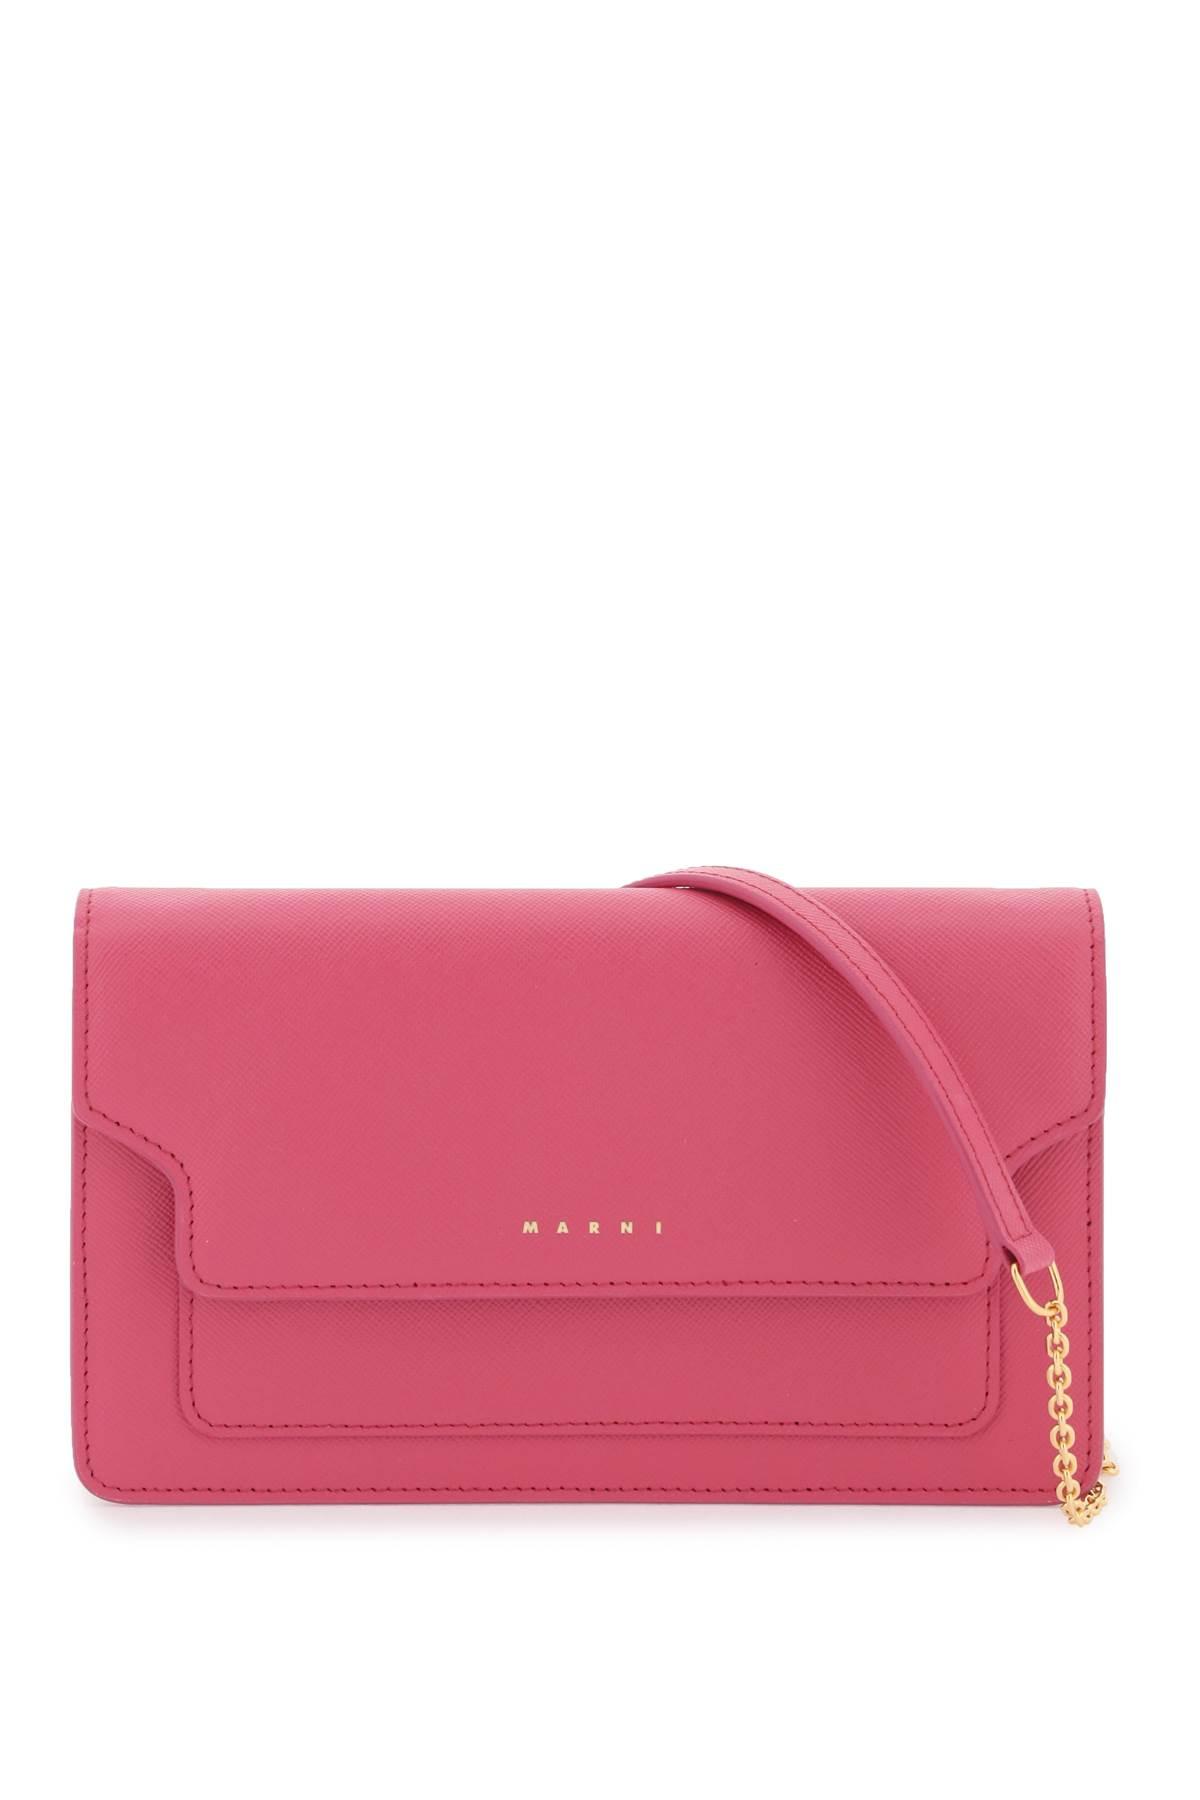 Marni] Trunk Mini Bag In Red White And Pink Saffiano Leather